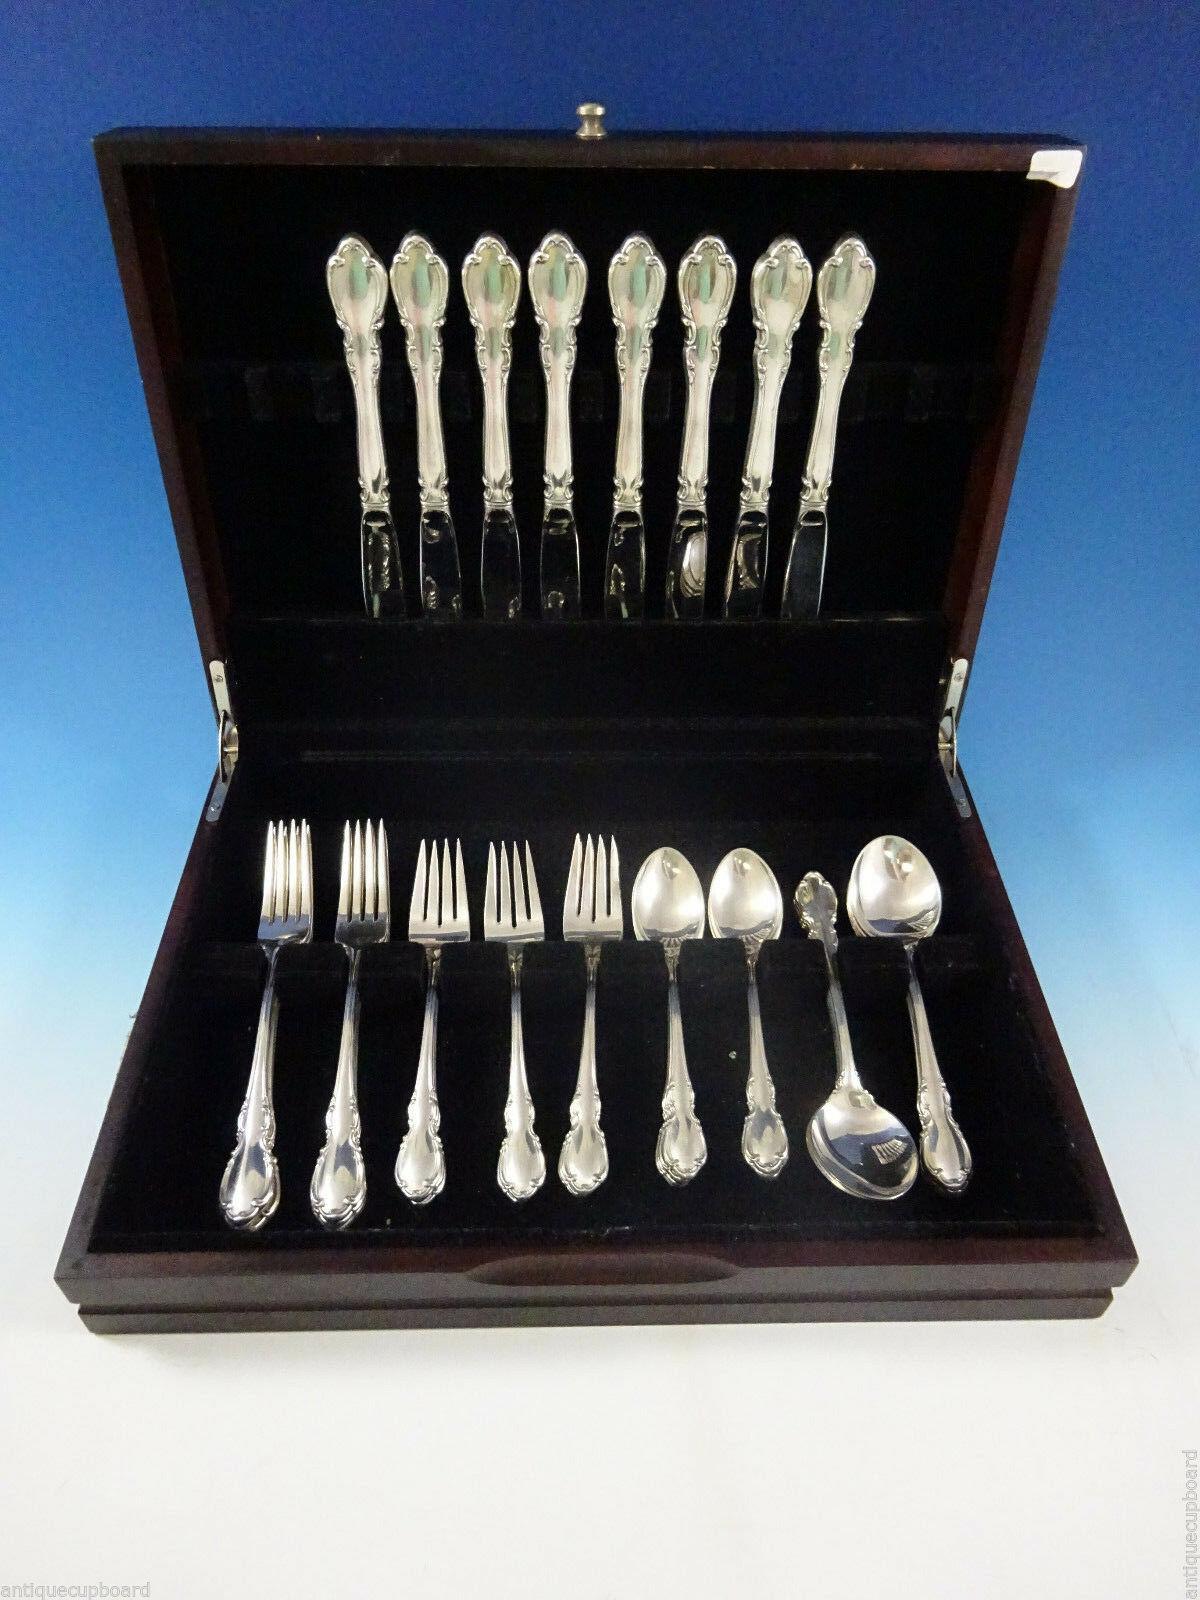 Legato by Towle sterling silver flatware set, 40 pieces. This set includes:

8 knives, 9 1/8